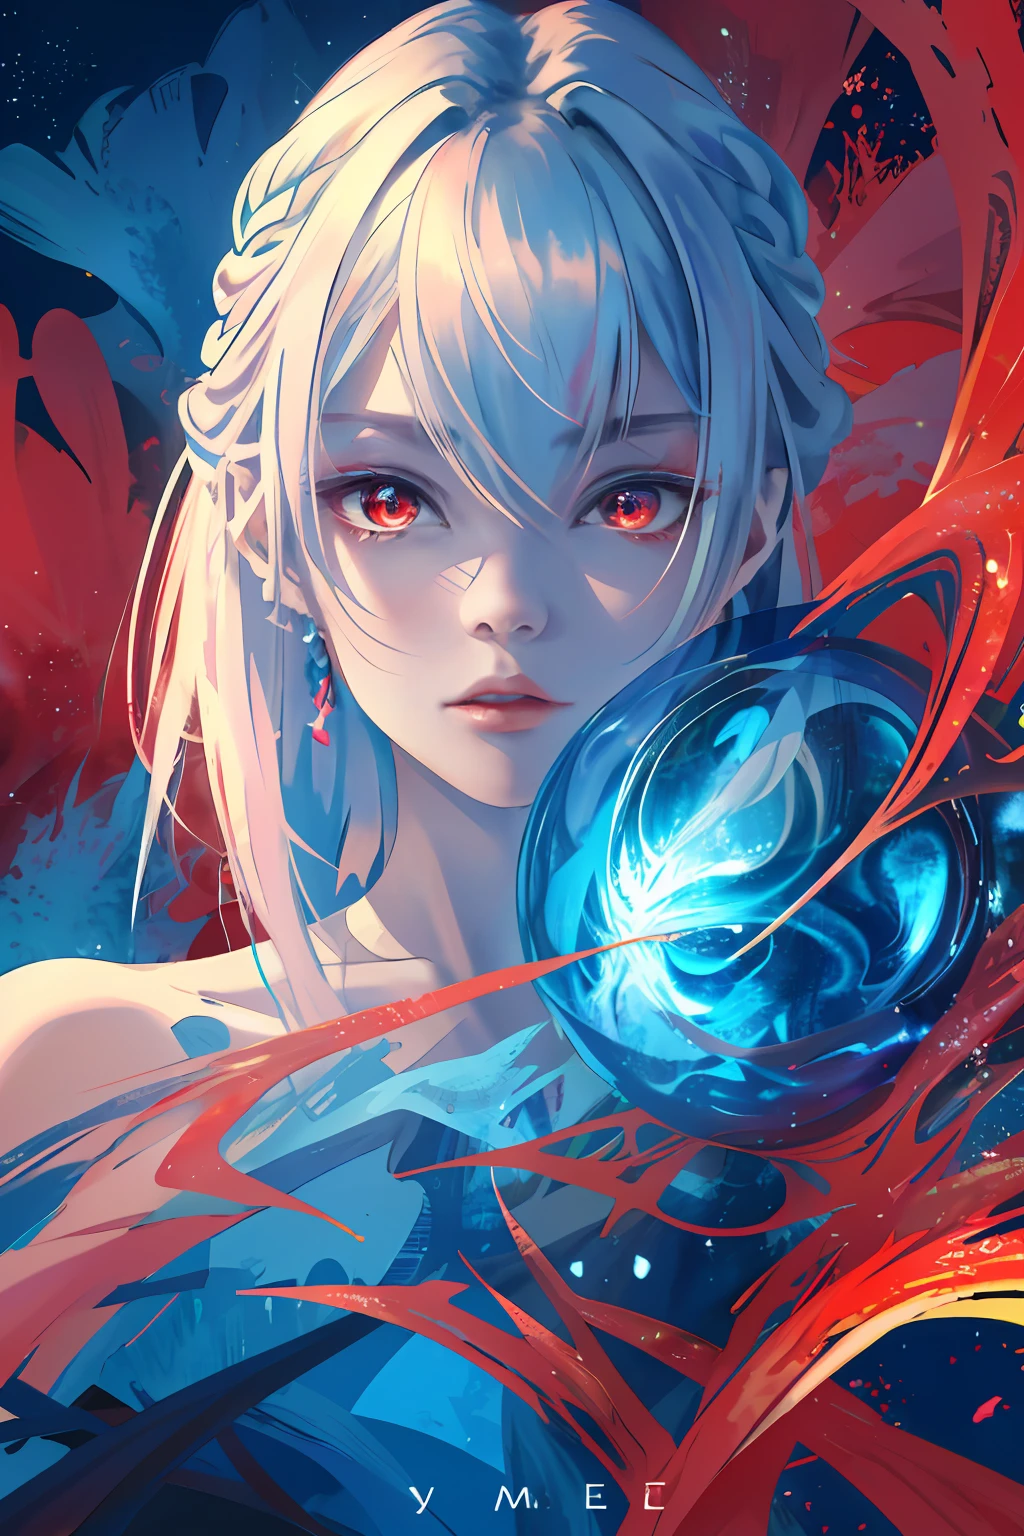 realisticlying、Masterpiece quality、best qualtiy、offcial art、Beauty and aesthetics：1.2、Very detailed fractal art、Colorful abstract background、Kizi、Kamimei、The color hair、long whitr hair、luminous red eyes、Mysterious magic、Girl of Ice and Fire，Red and blue color scheme，cinematric light